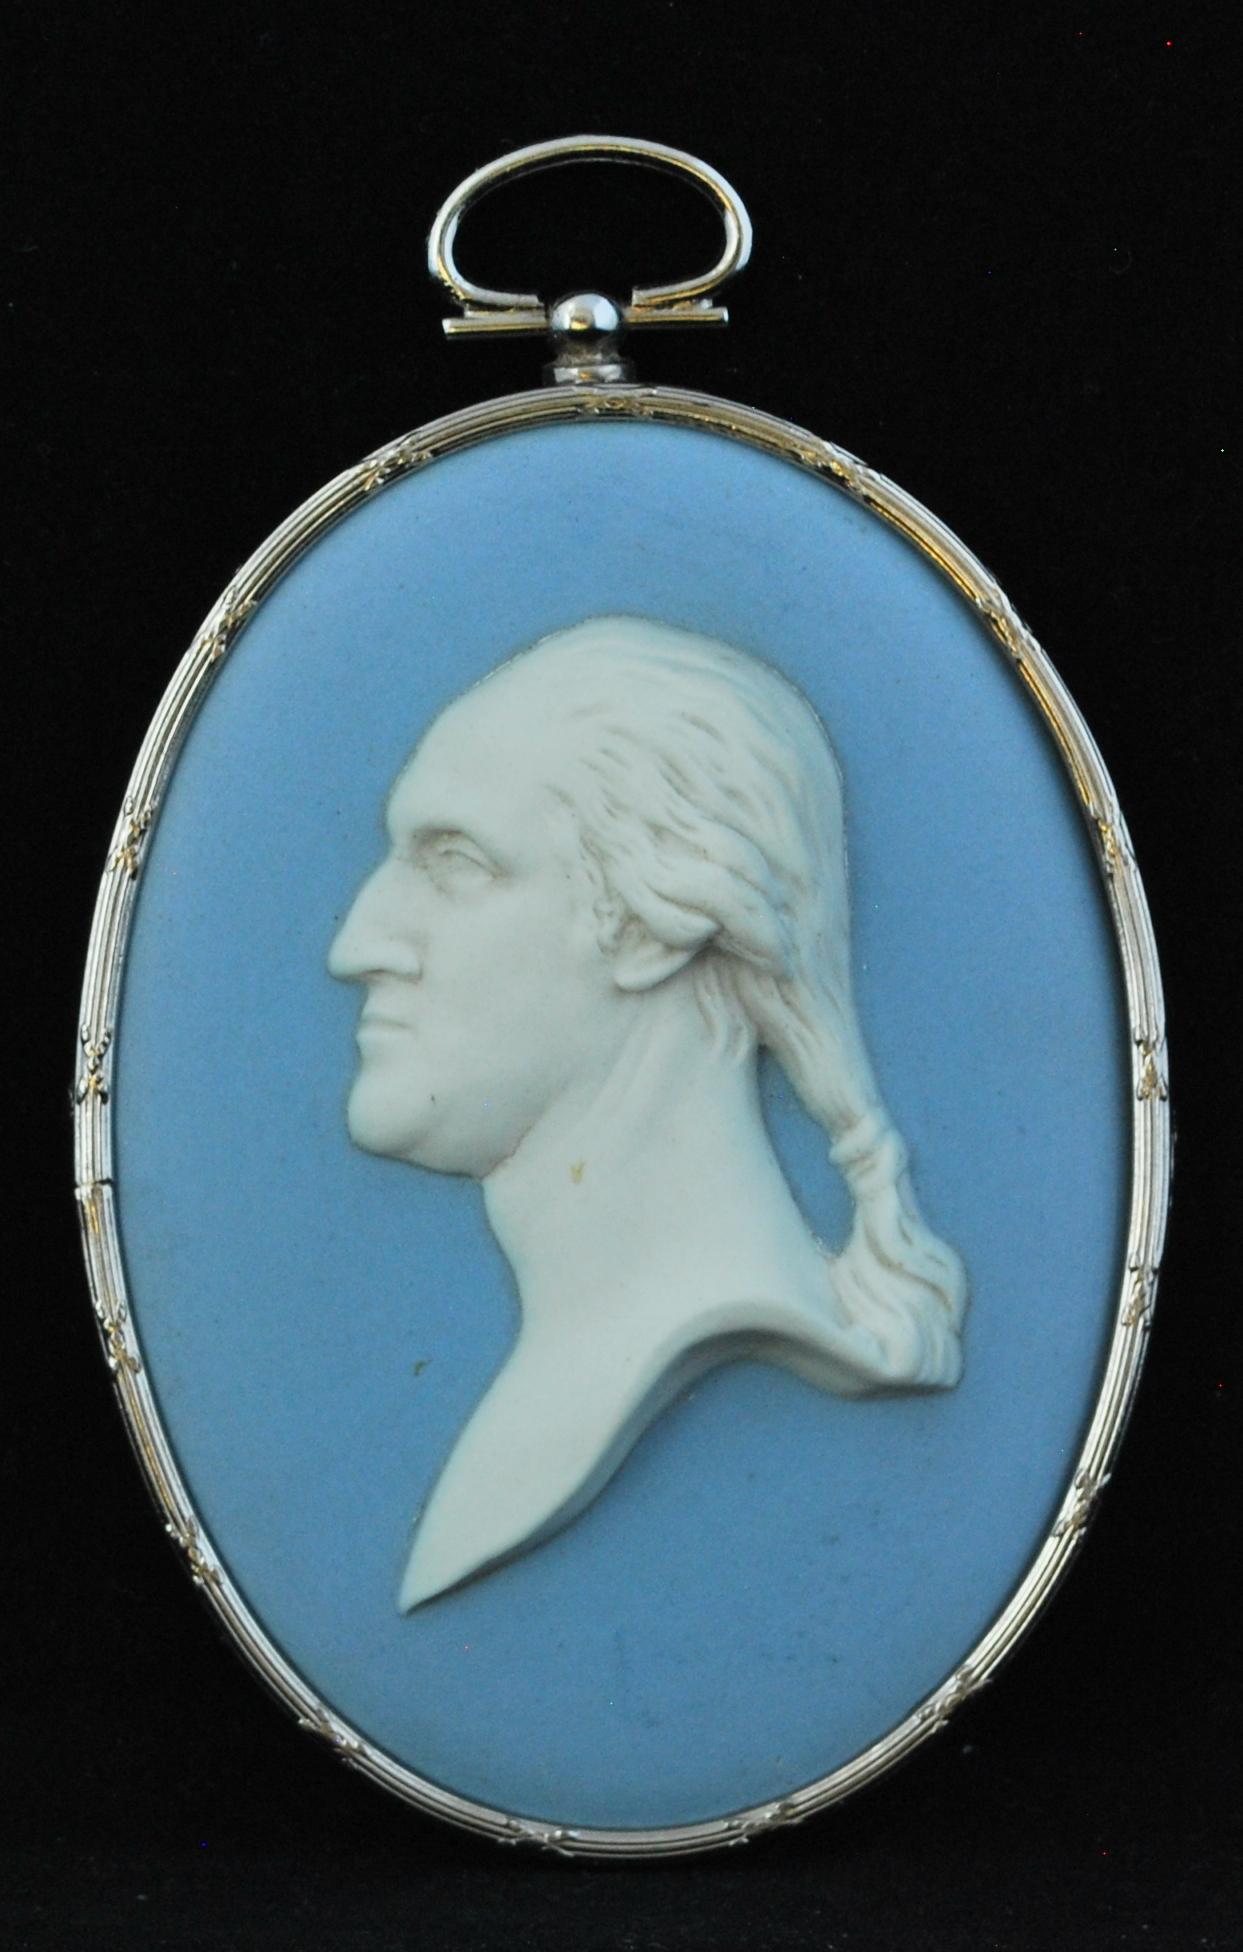 A portrait medallion of George Washington, in pale blue jasperware, and set in a quality frame of silver, reeded and cross-banded. Decorated by Bert Bentley, one of the best of the early 20th century decorators at Wedgwood.

This profile portrait of